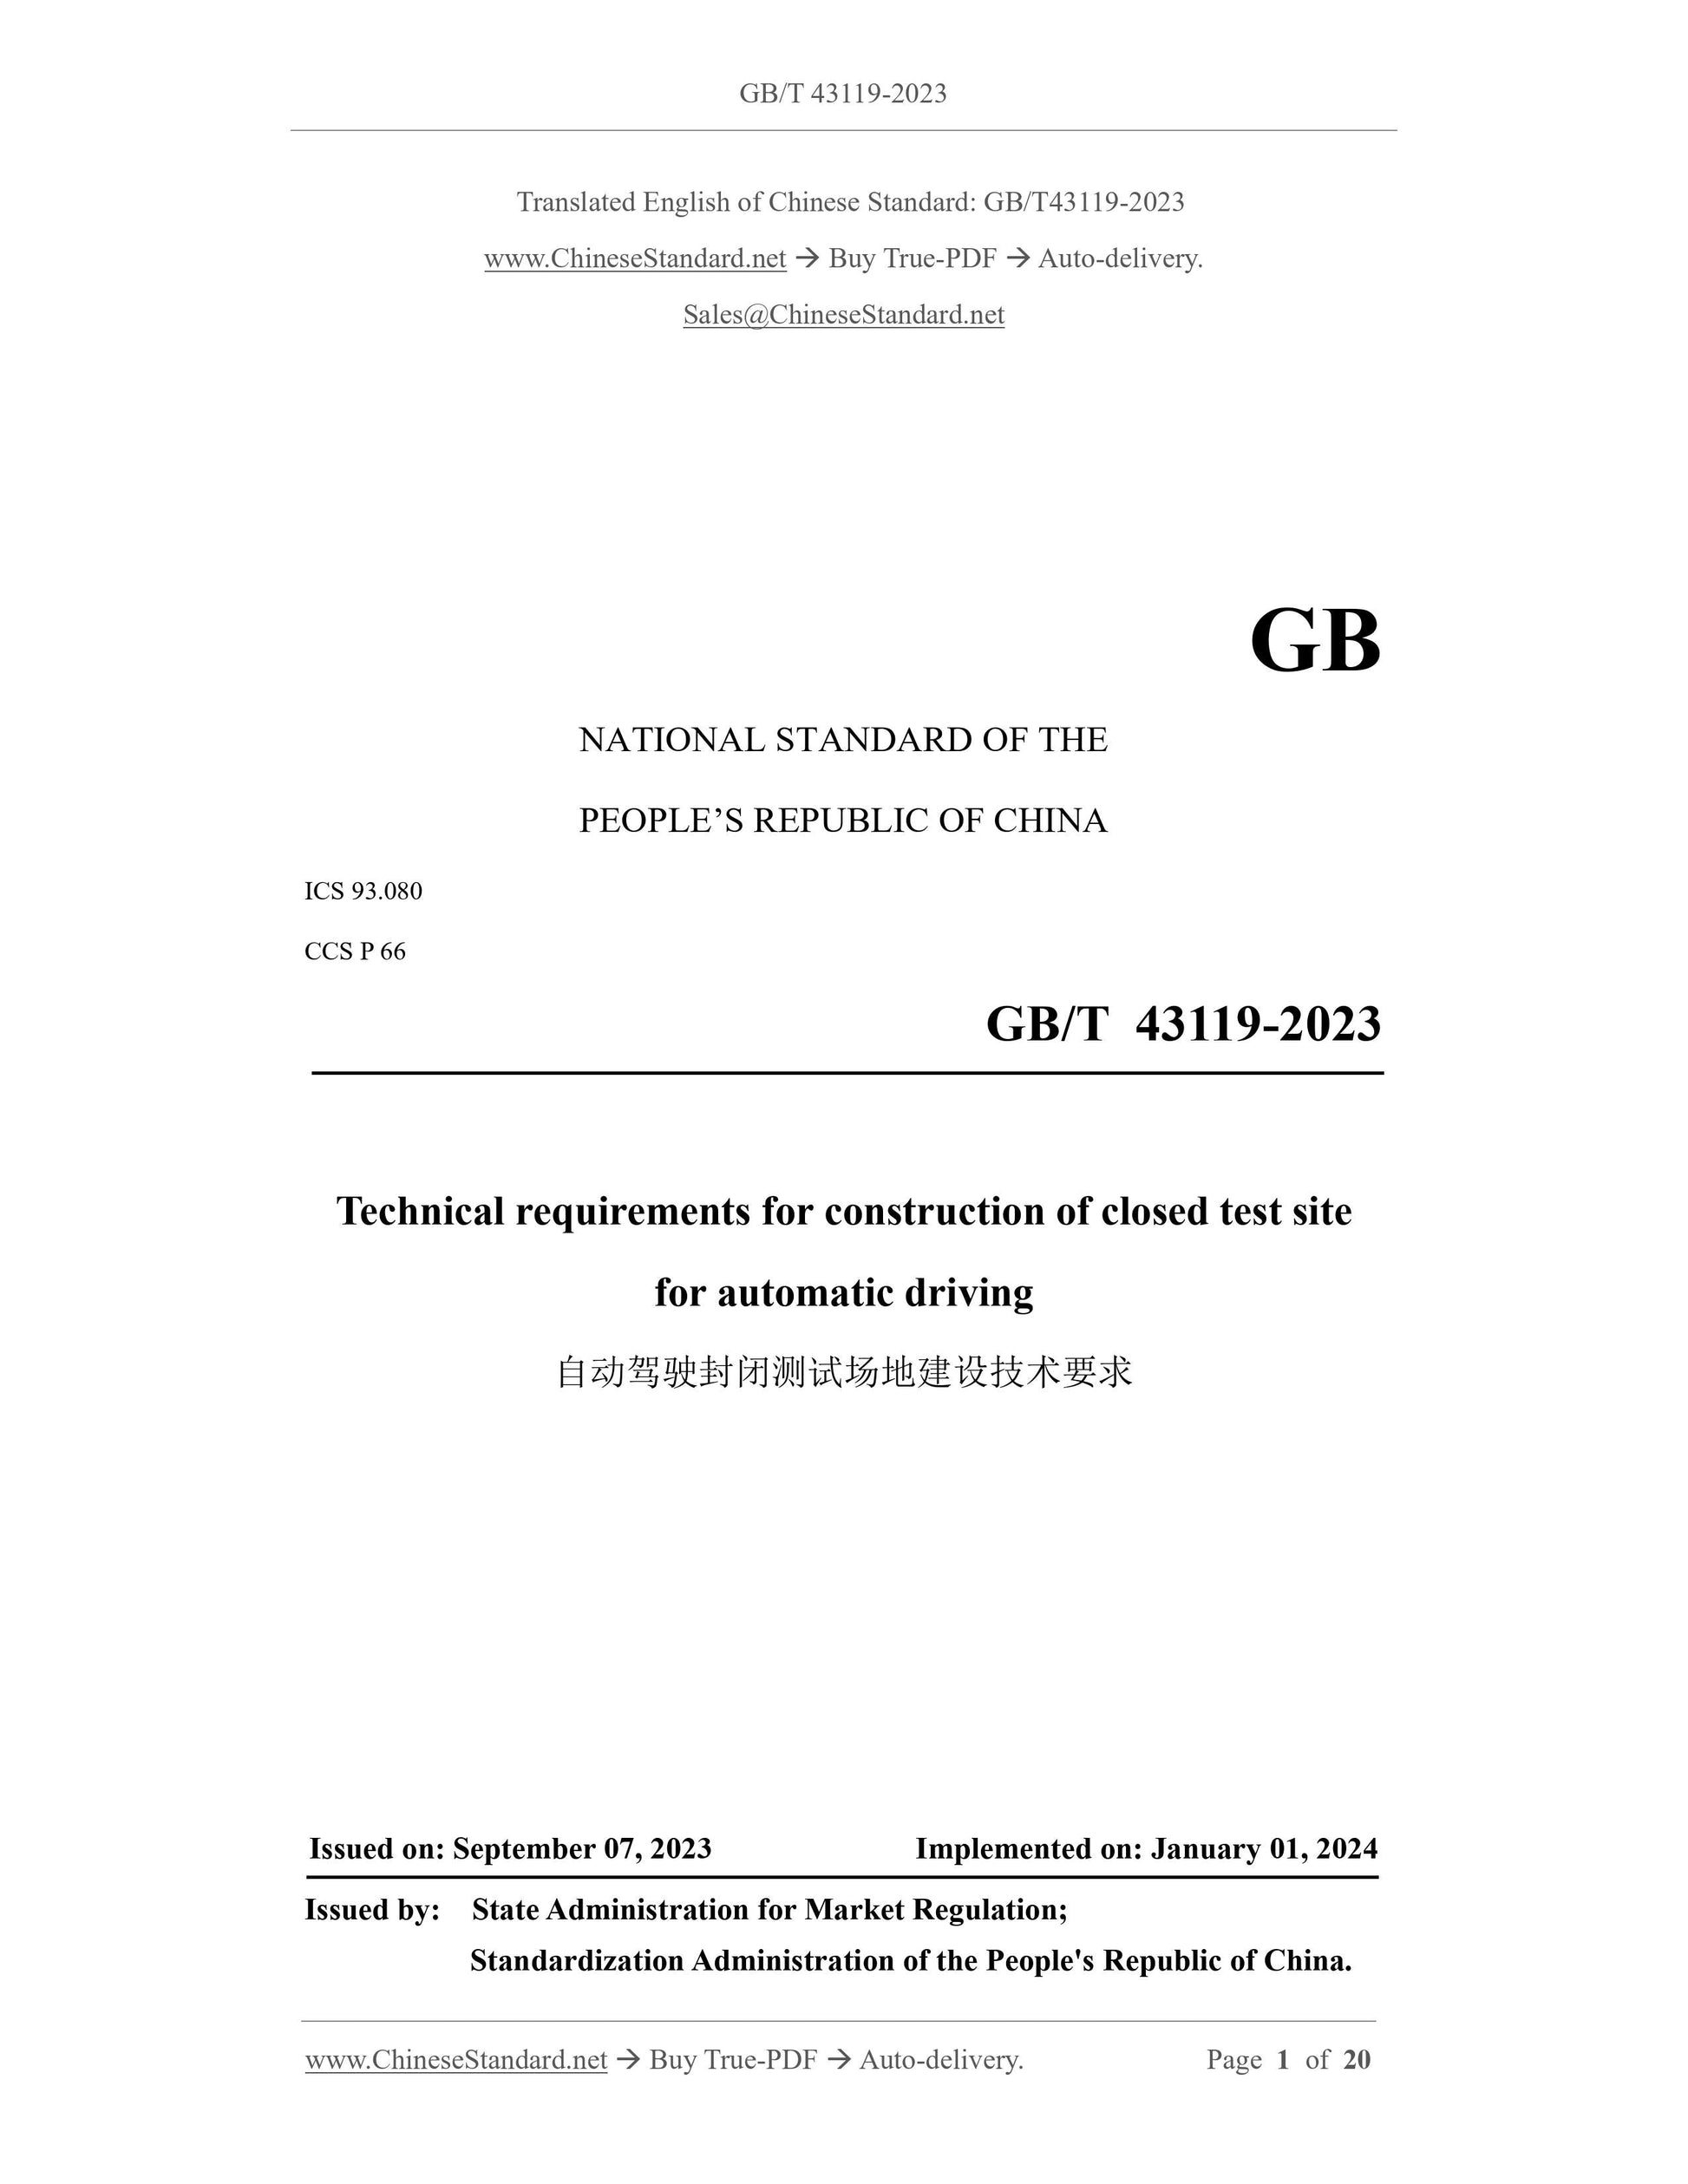 GB/T 43119-2023 Page 1